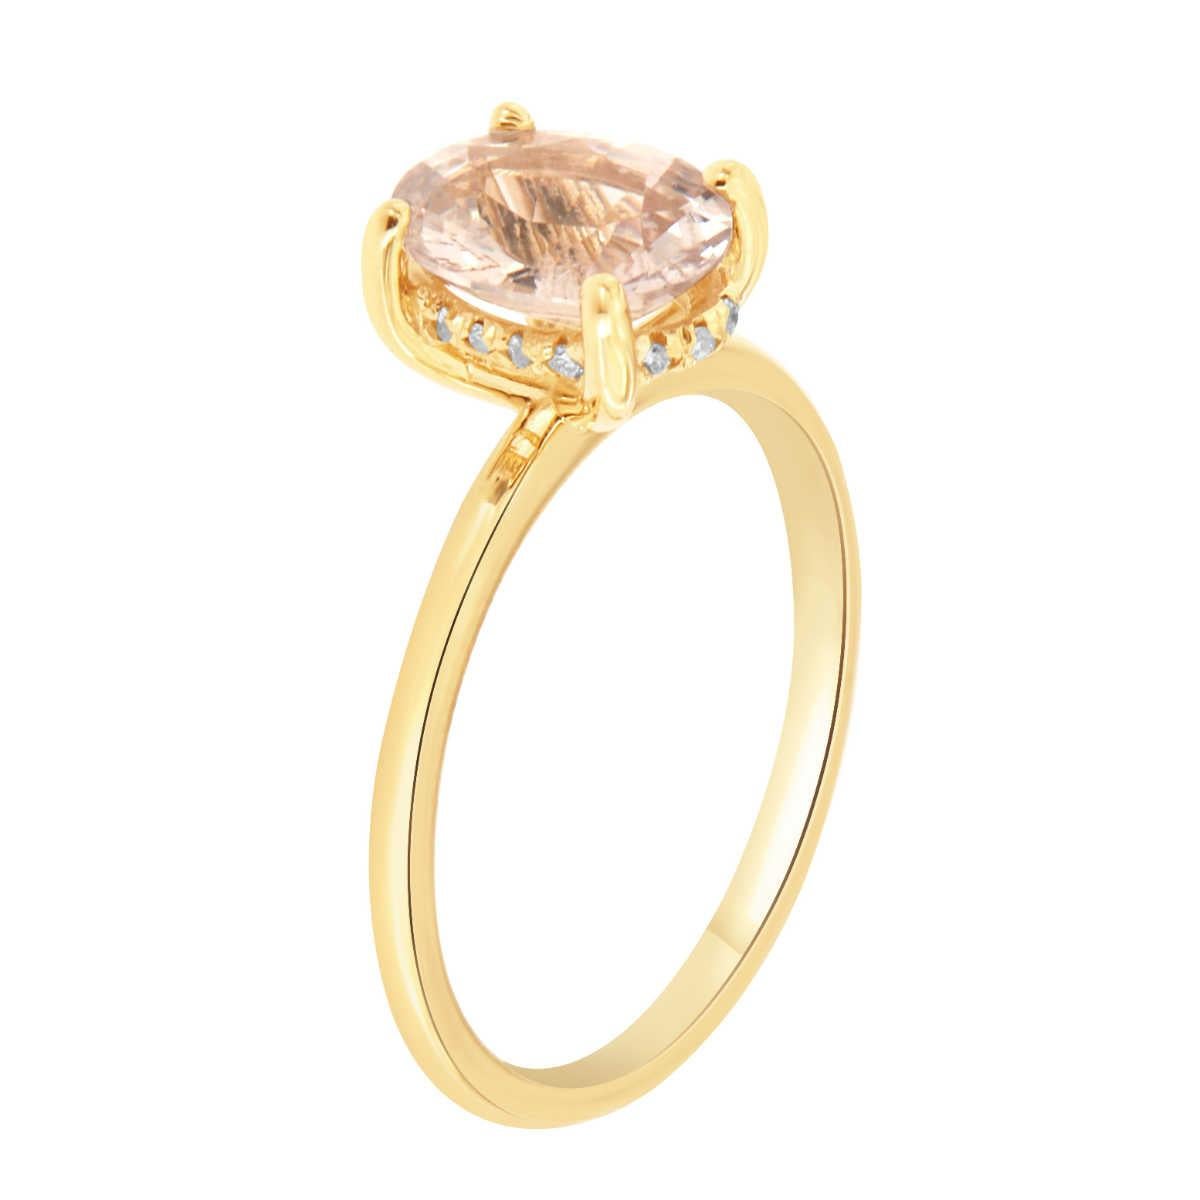 This 14k yellow gold ring features a rare  GIA Certified 1.77-carat Oval-shaped Unheated, Very Light Pink sapphire from Sri Lanka. The rare gem is encircled by a hidden halo of diamonds on its basket gallery with a weight of 0.15 carat. The band is